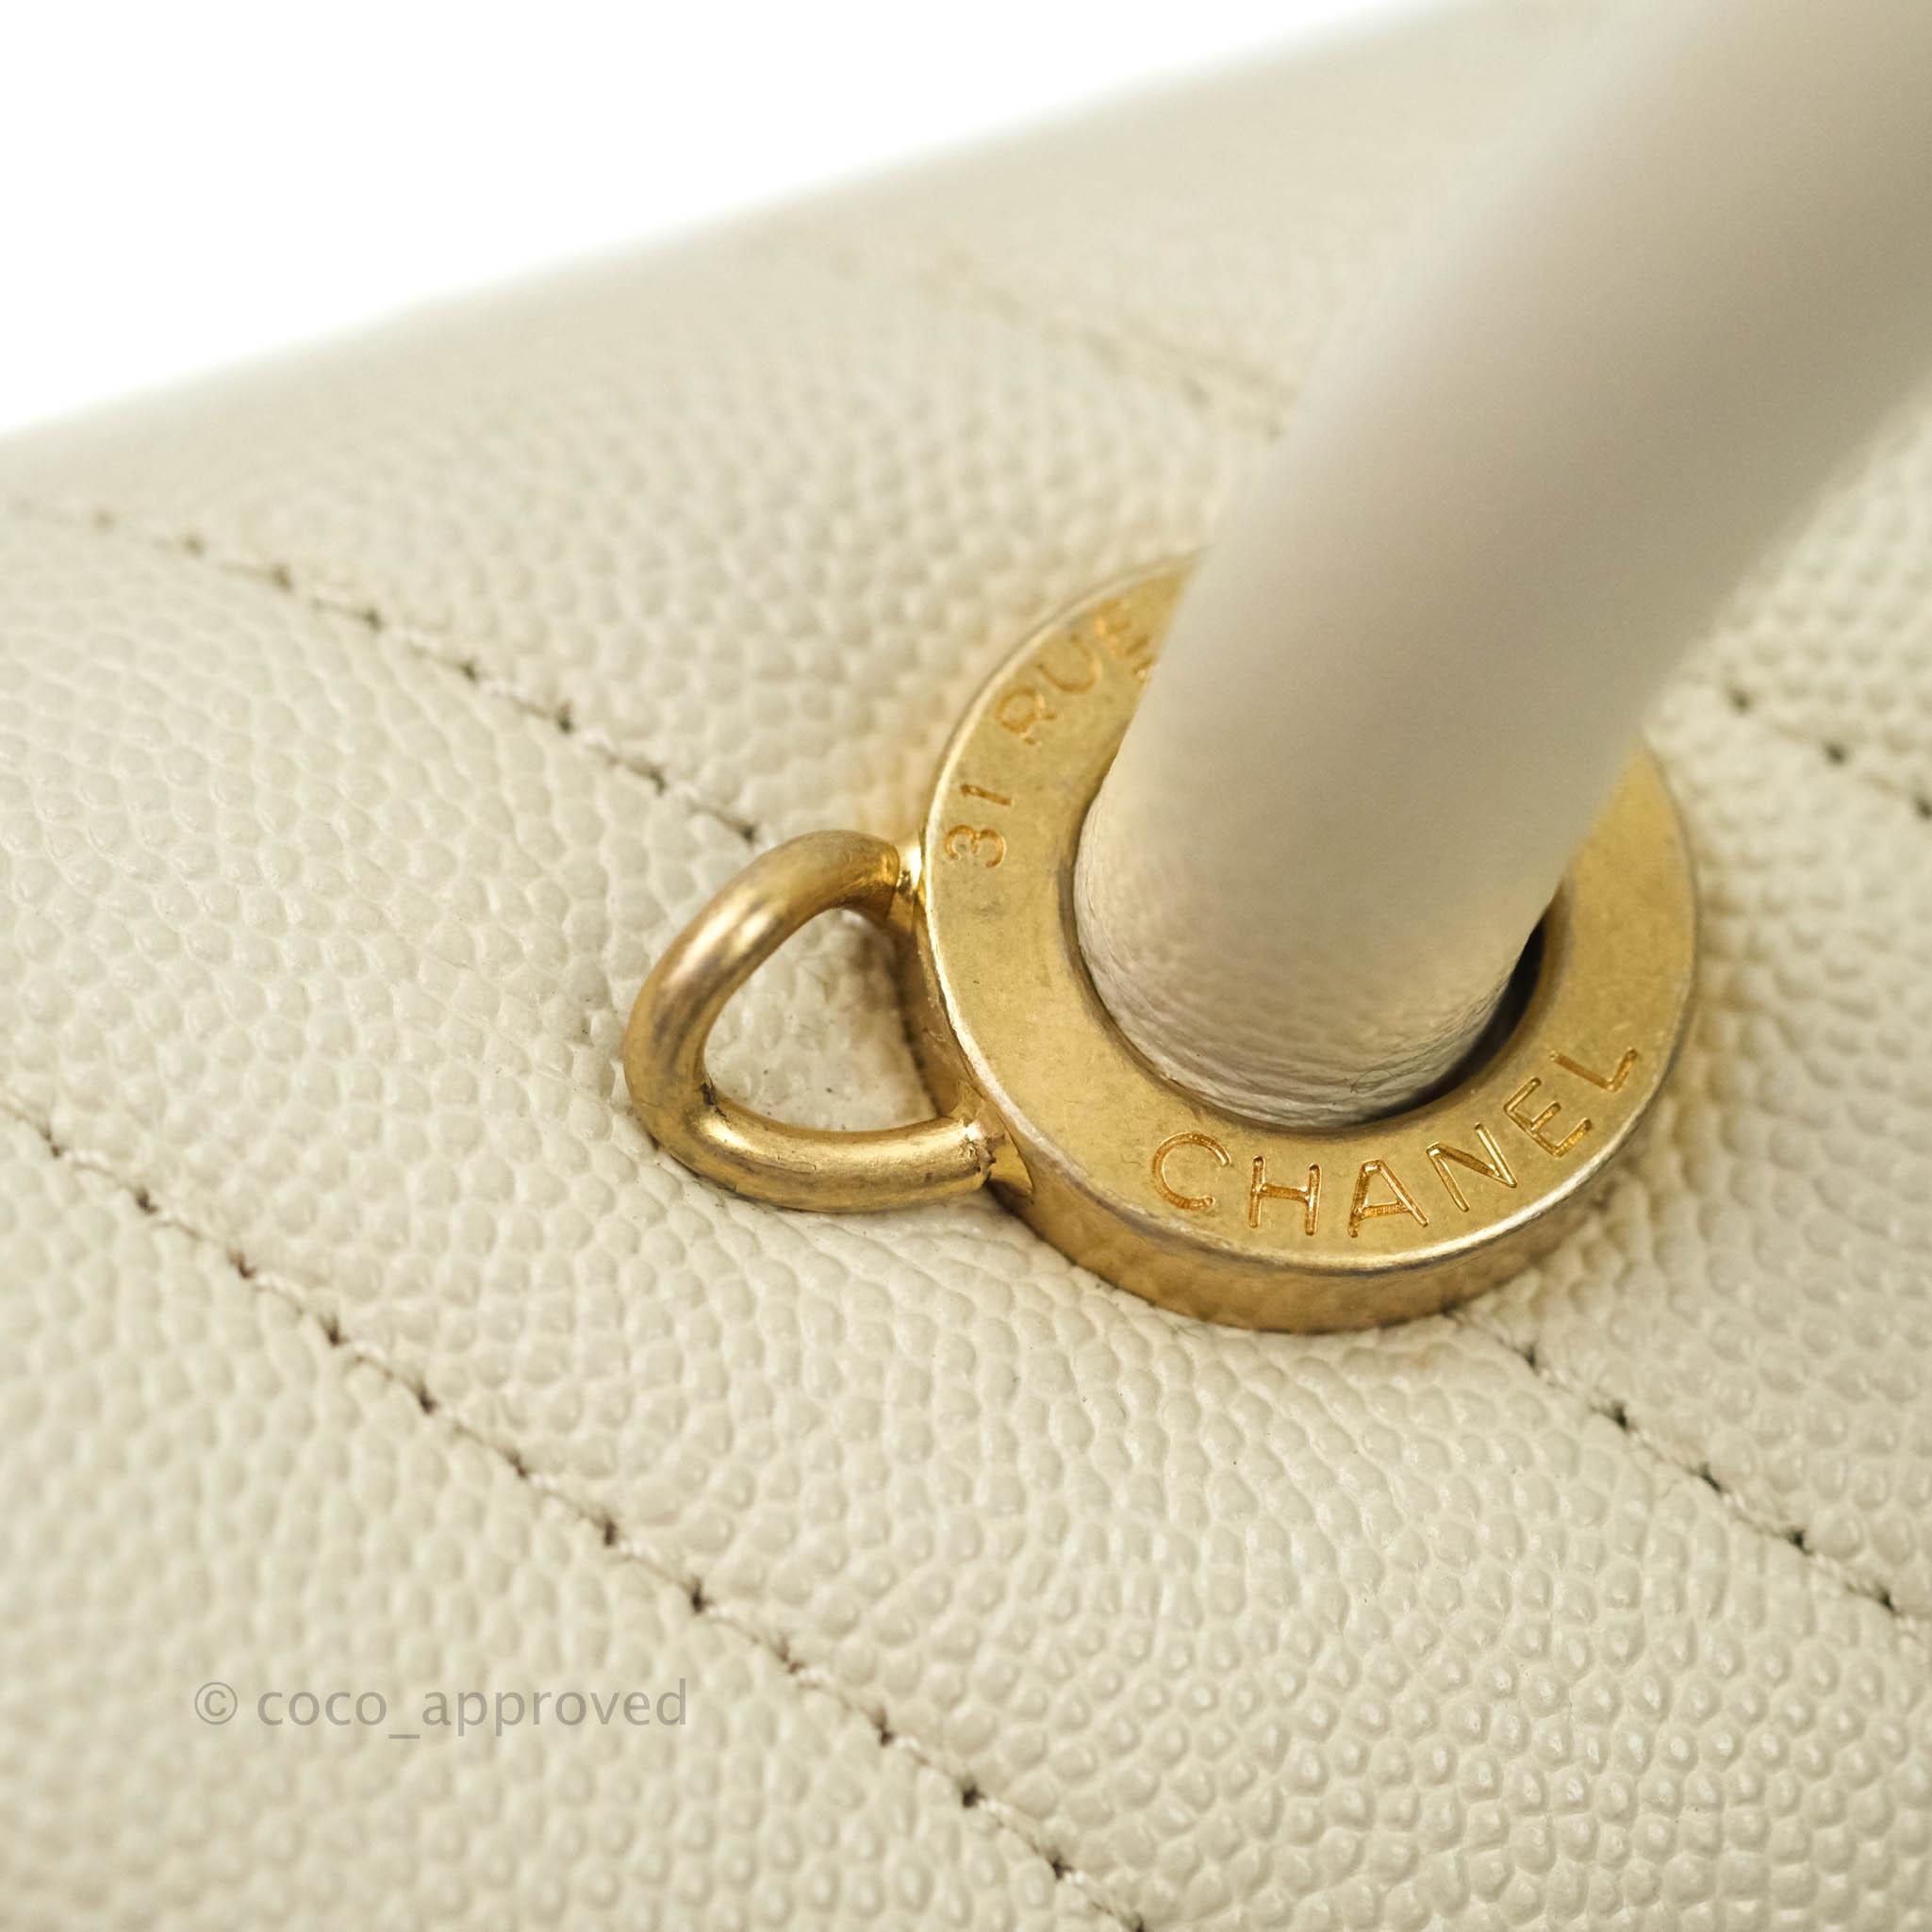 Chanel Small Coco Handle Quilted Beige Caviar Aged Gold Hardware